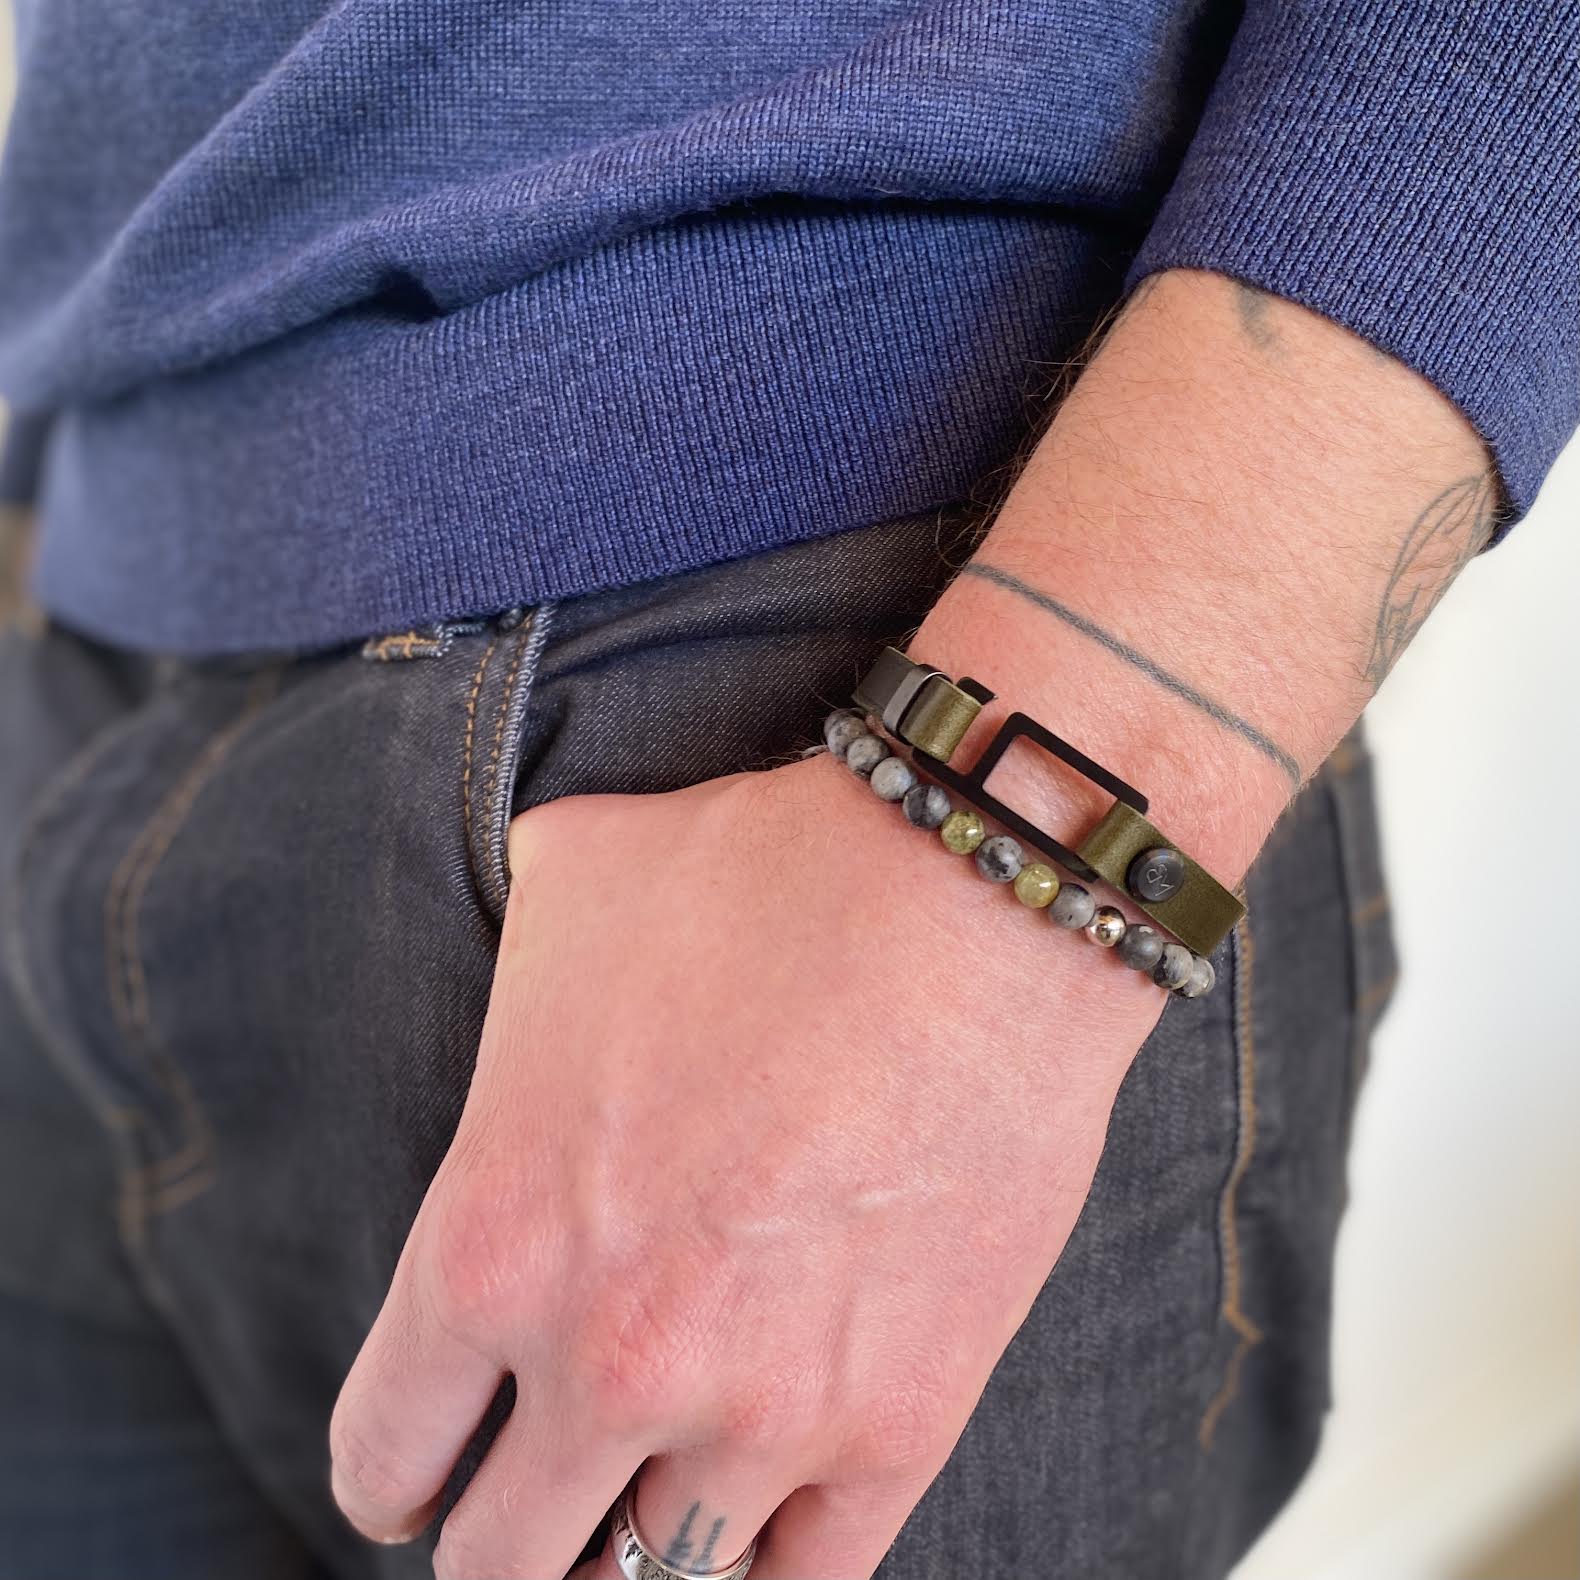 Our striking RMG military green Italian leather bracelet is paired perfectly with our artisan designed, lightly brushed hardware. Your hardware choices include Rose Gold, Yellow Gold, Stainless Steel or Black Ceramic. This adjustable size bracelet is a distinctive piece worn alone or with a WristBend stacking bracelet. Made by WristBend